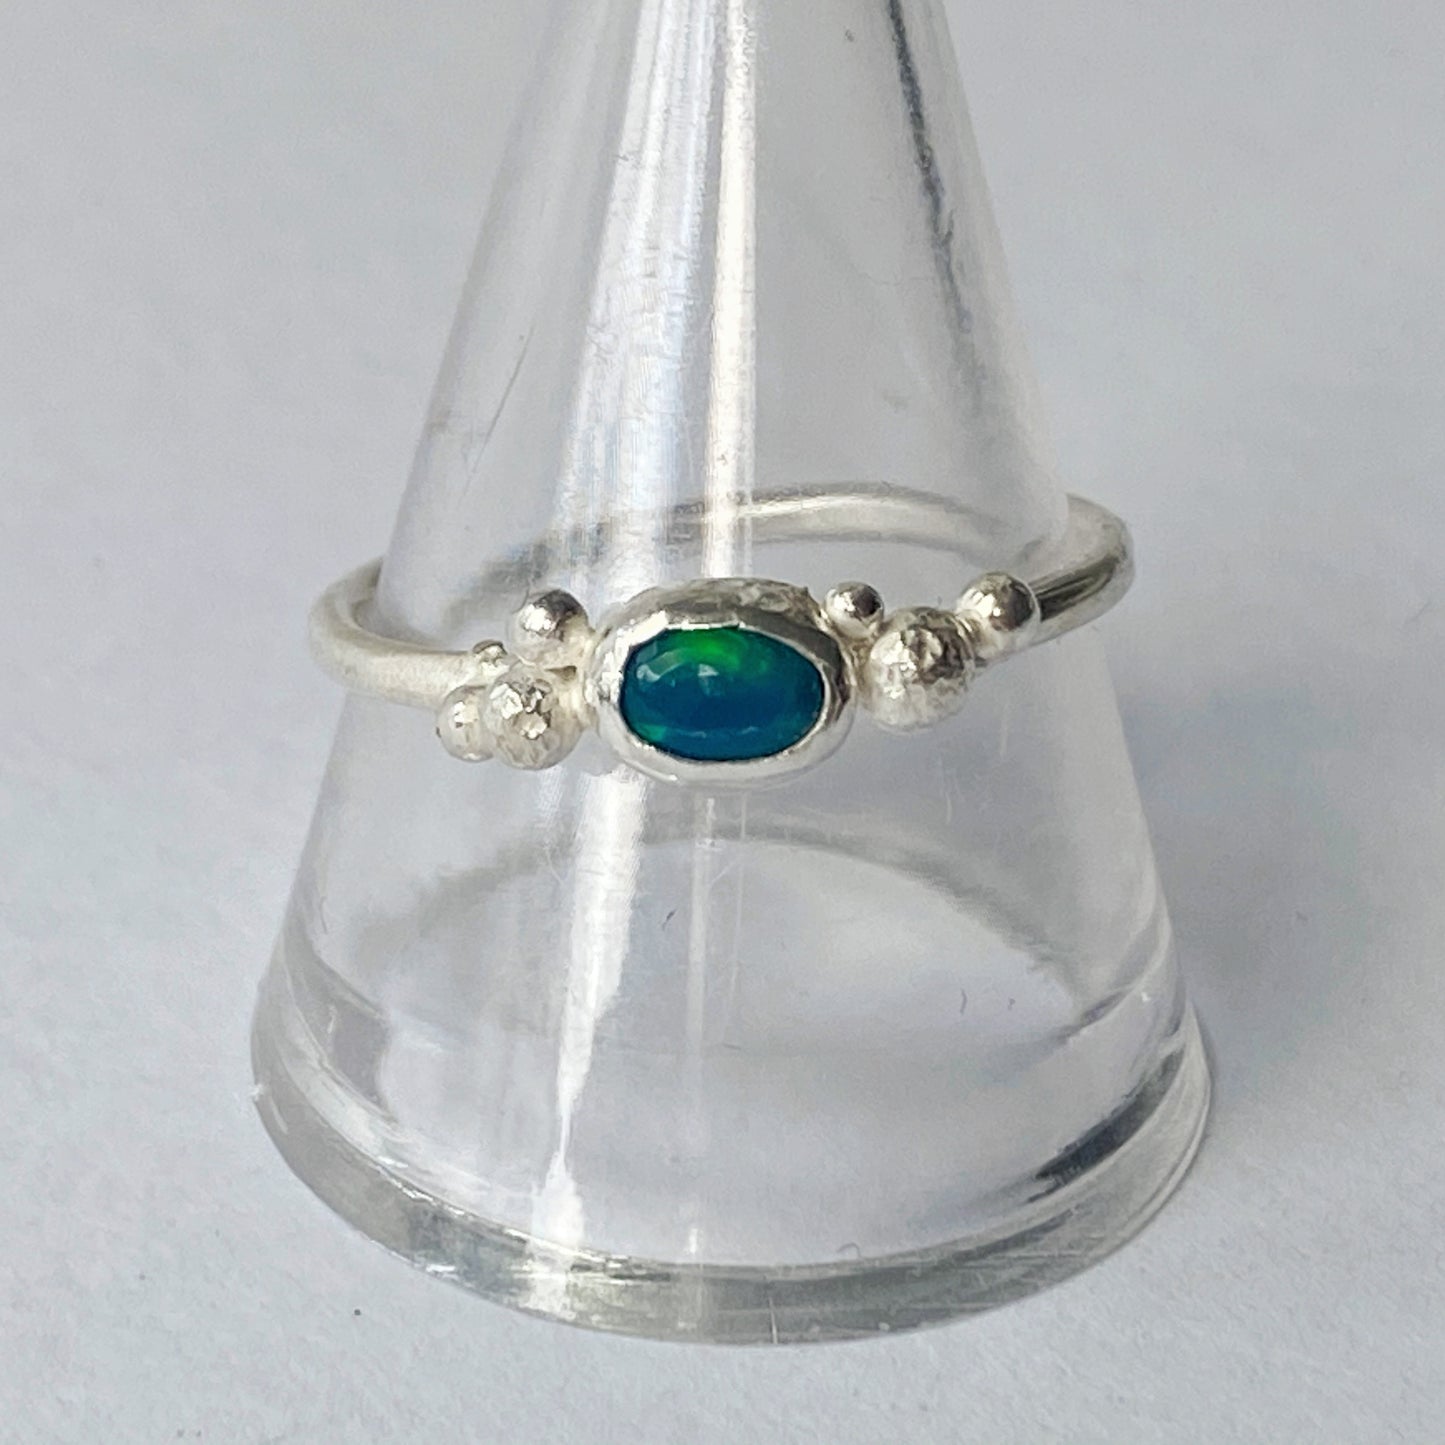 Opal Sterling Silver Ring